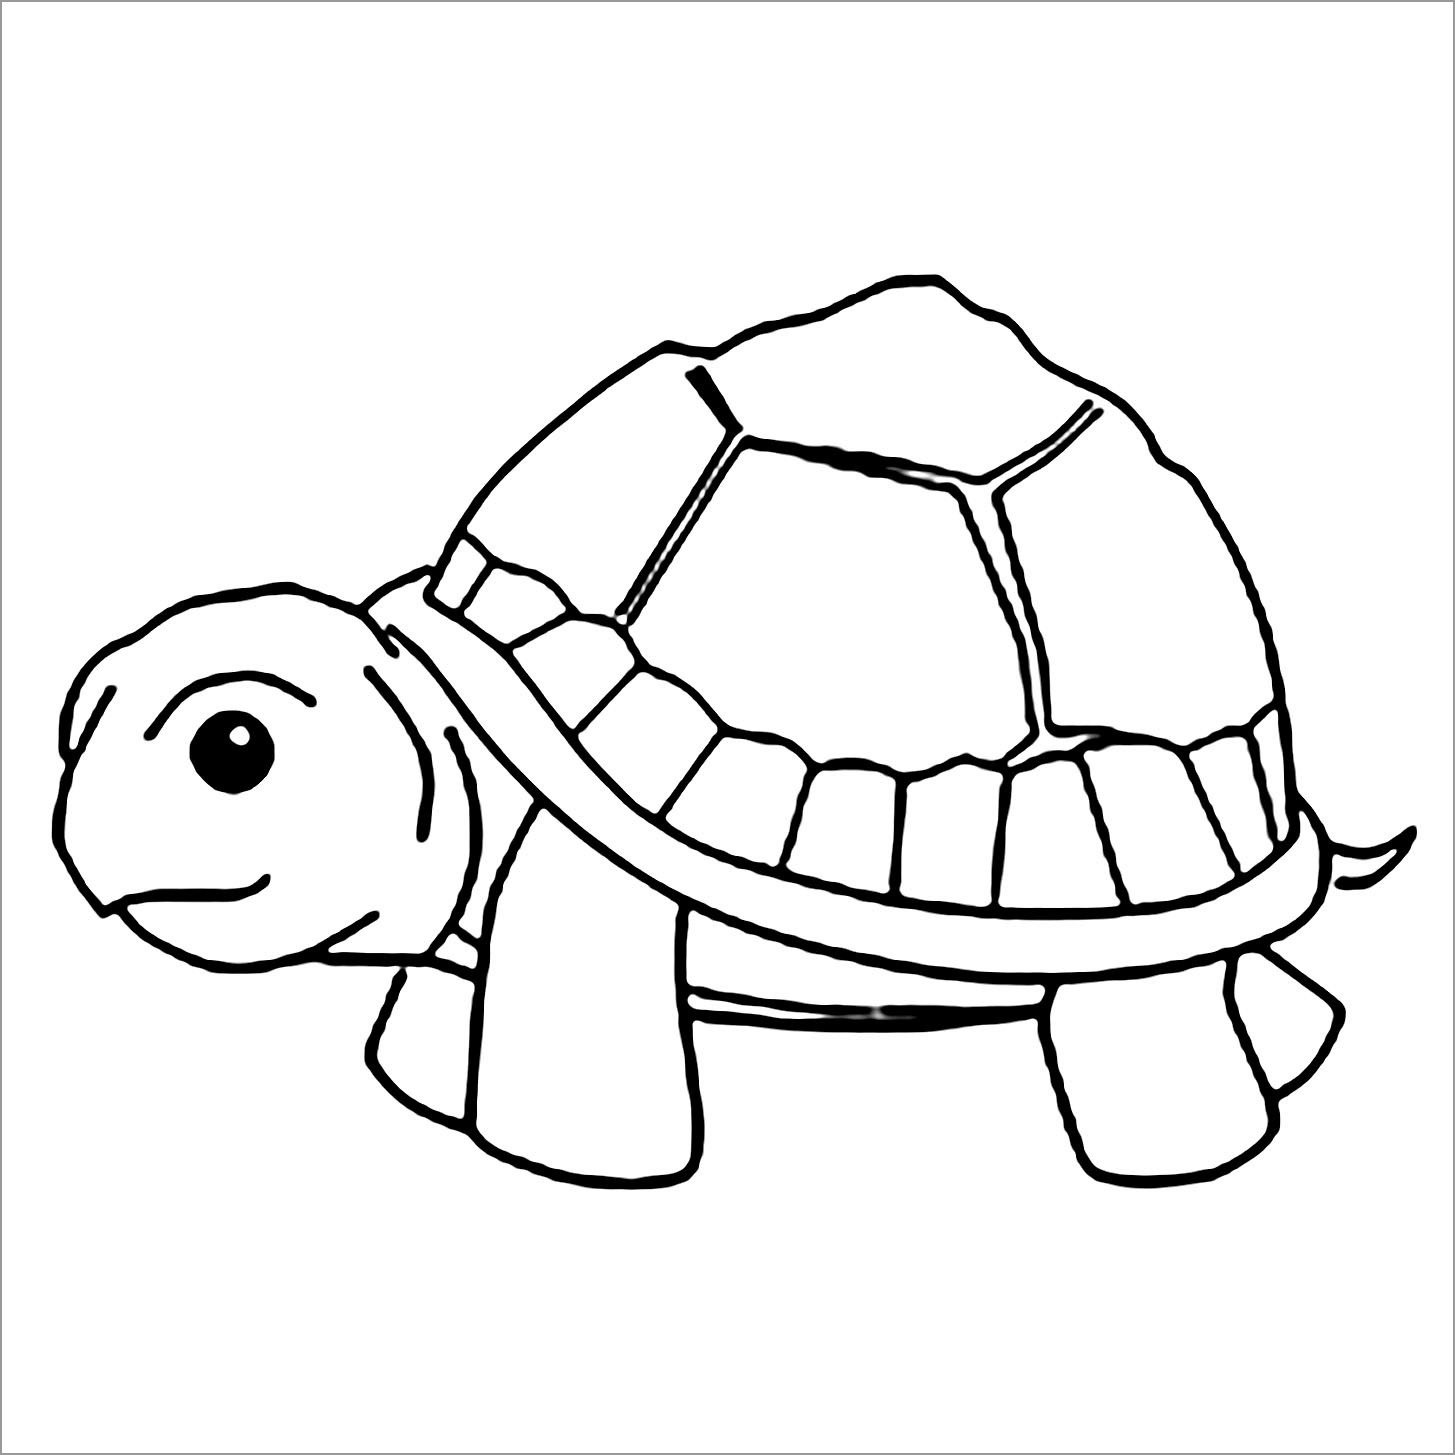 Tortoise Coloring Page for Kids   ColoringBay